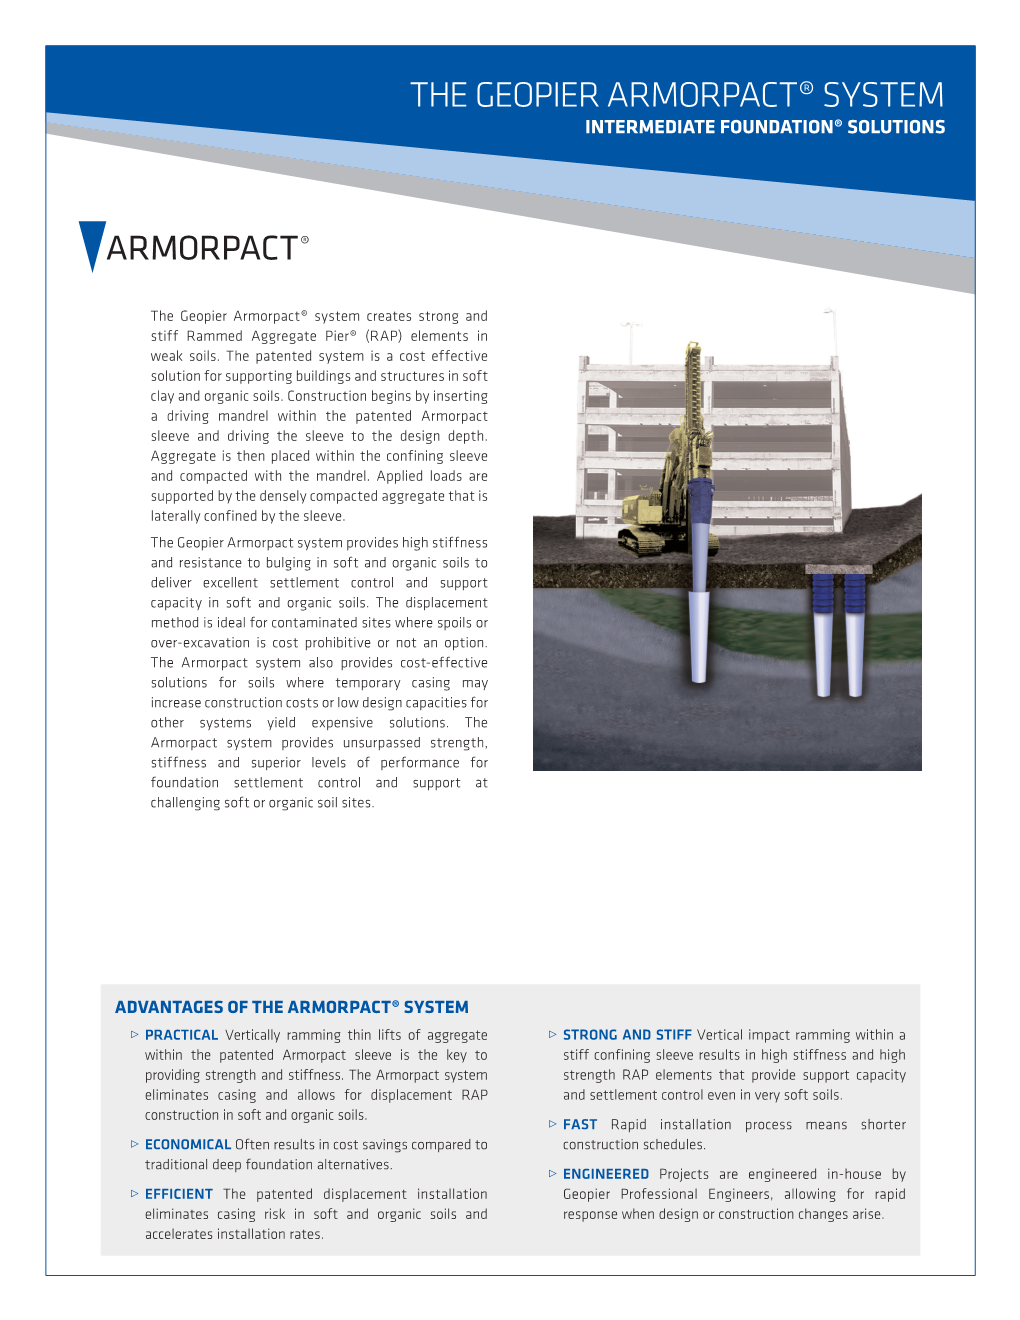 The Geopier ARMORPACT® System Intermediate Foundation® Solutions